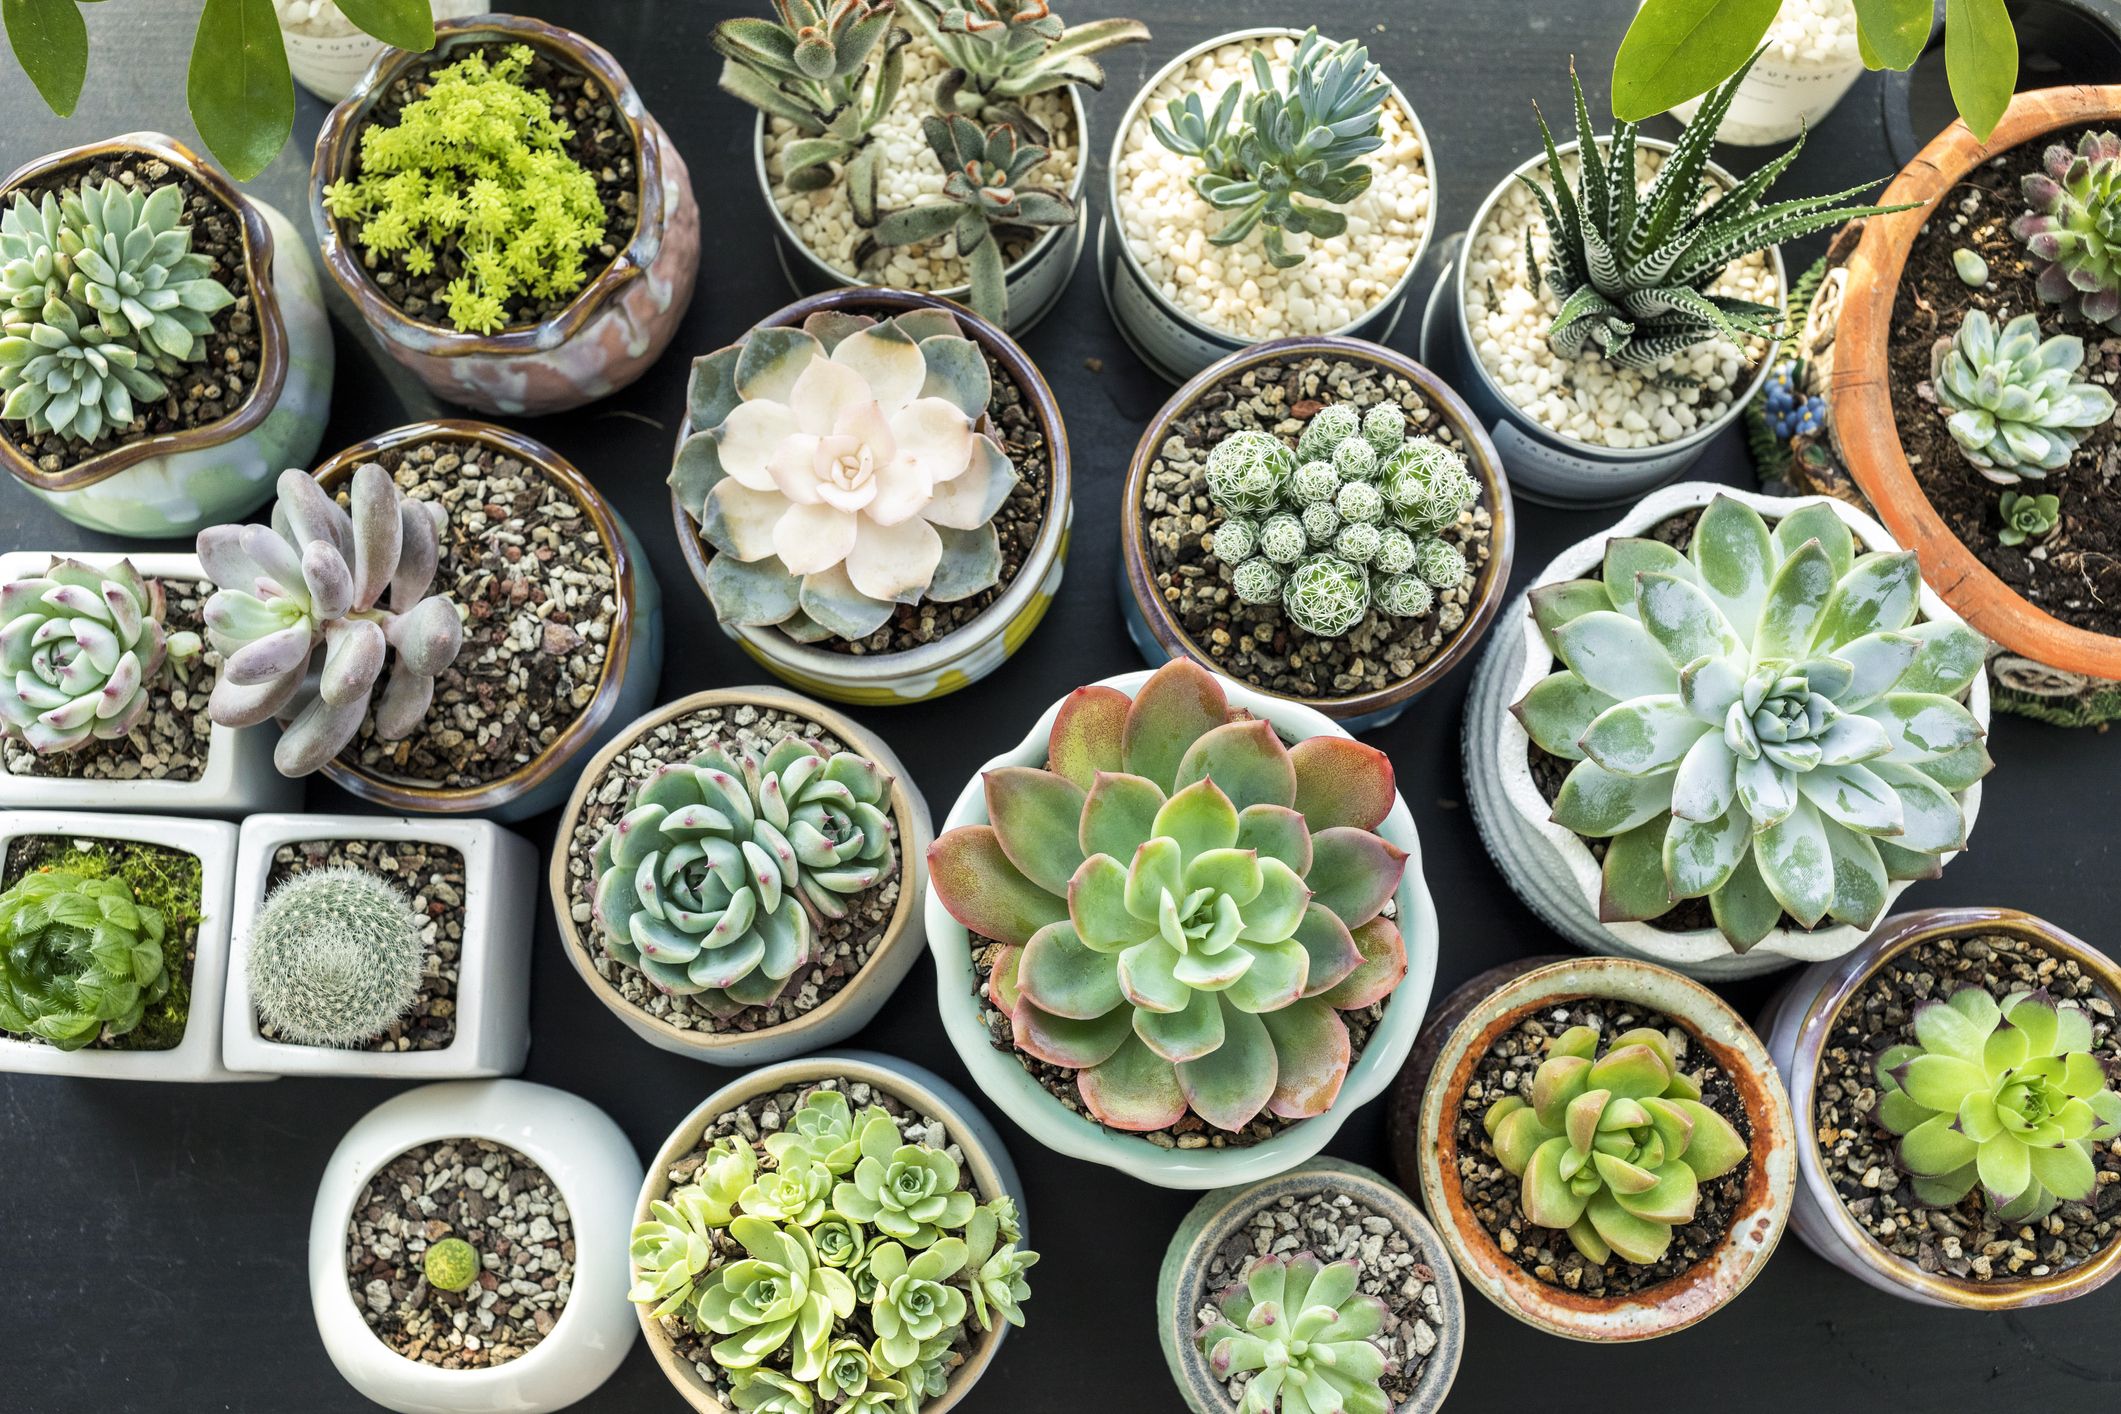 15 Best Succulent Plant Types And How To Grow Them Indoors Or Out